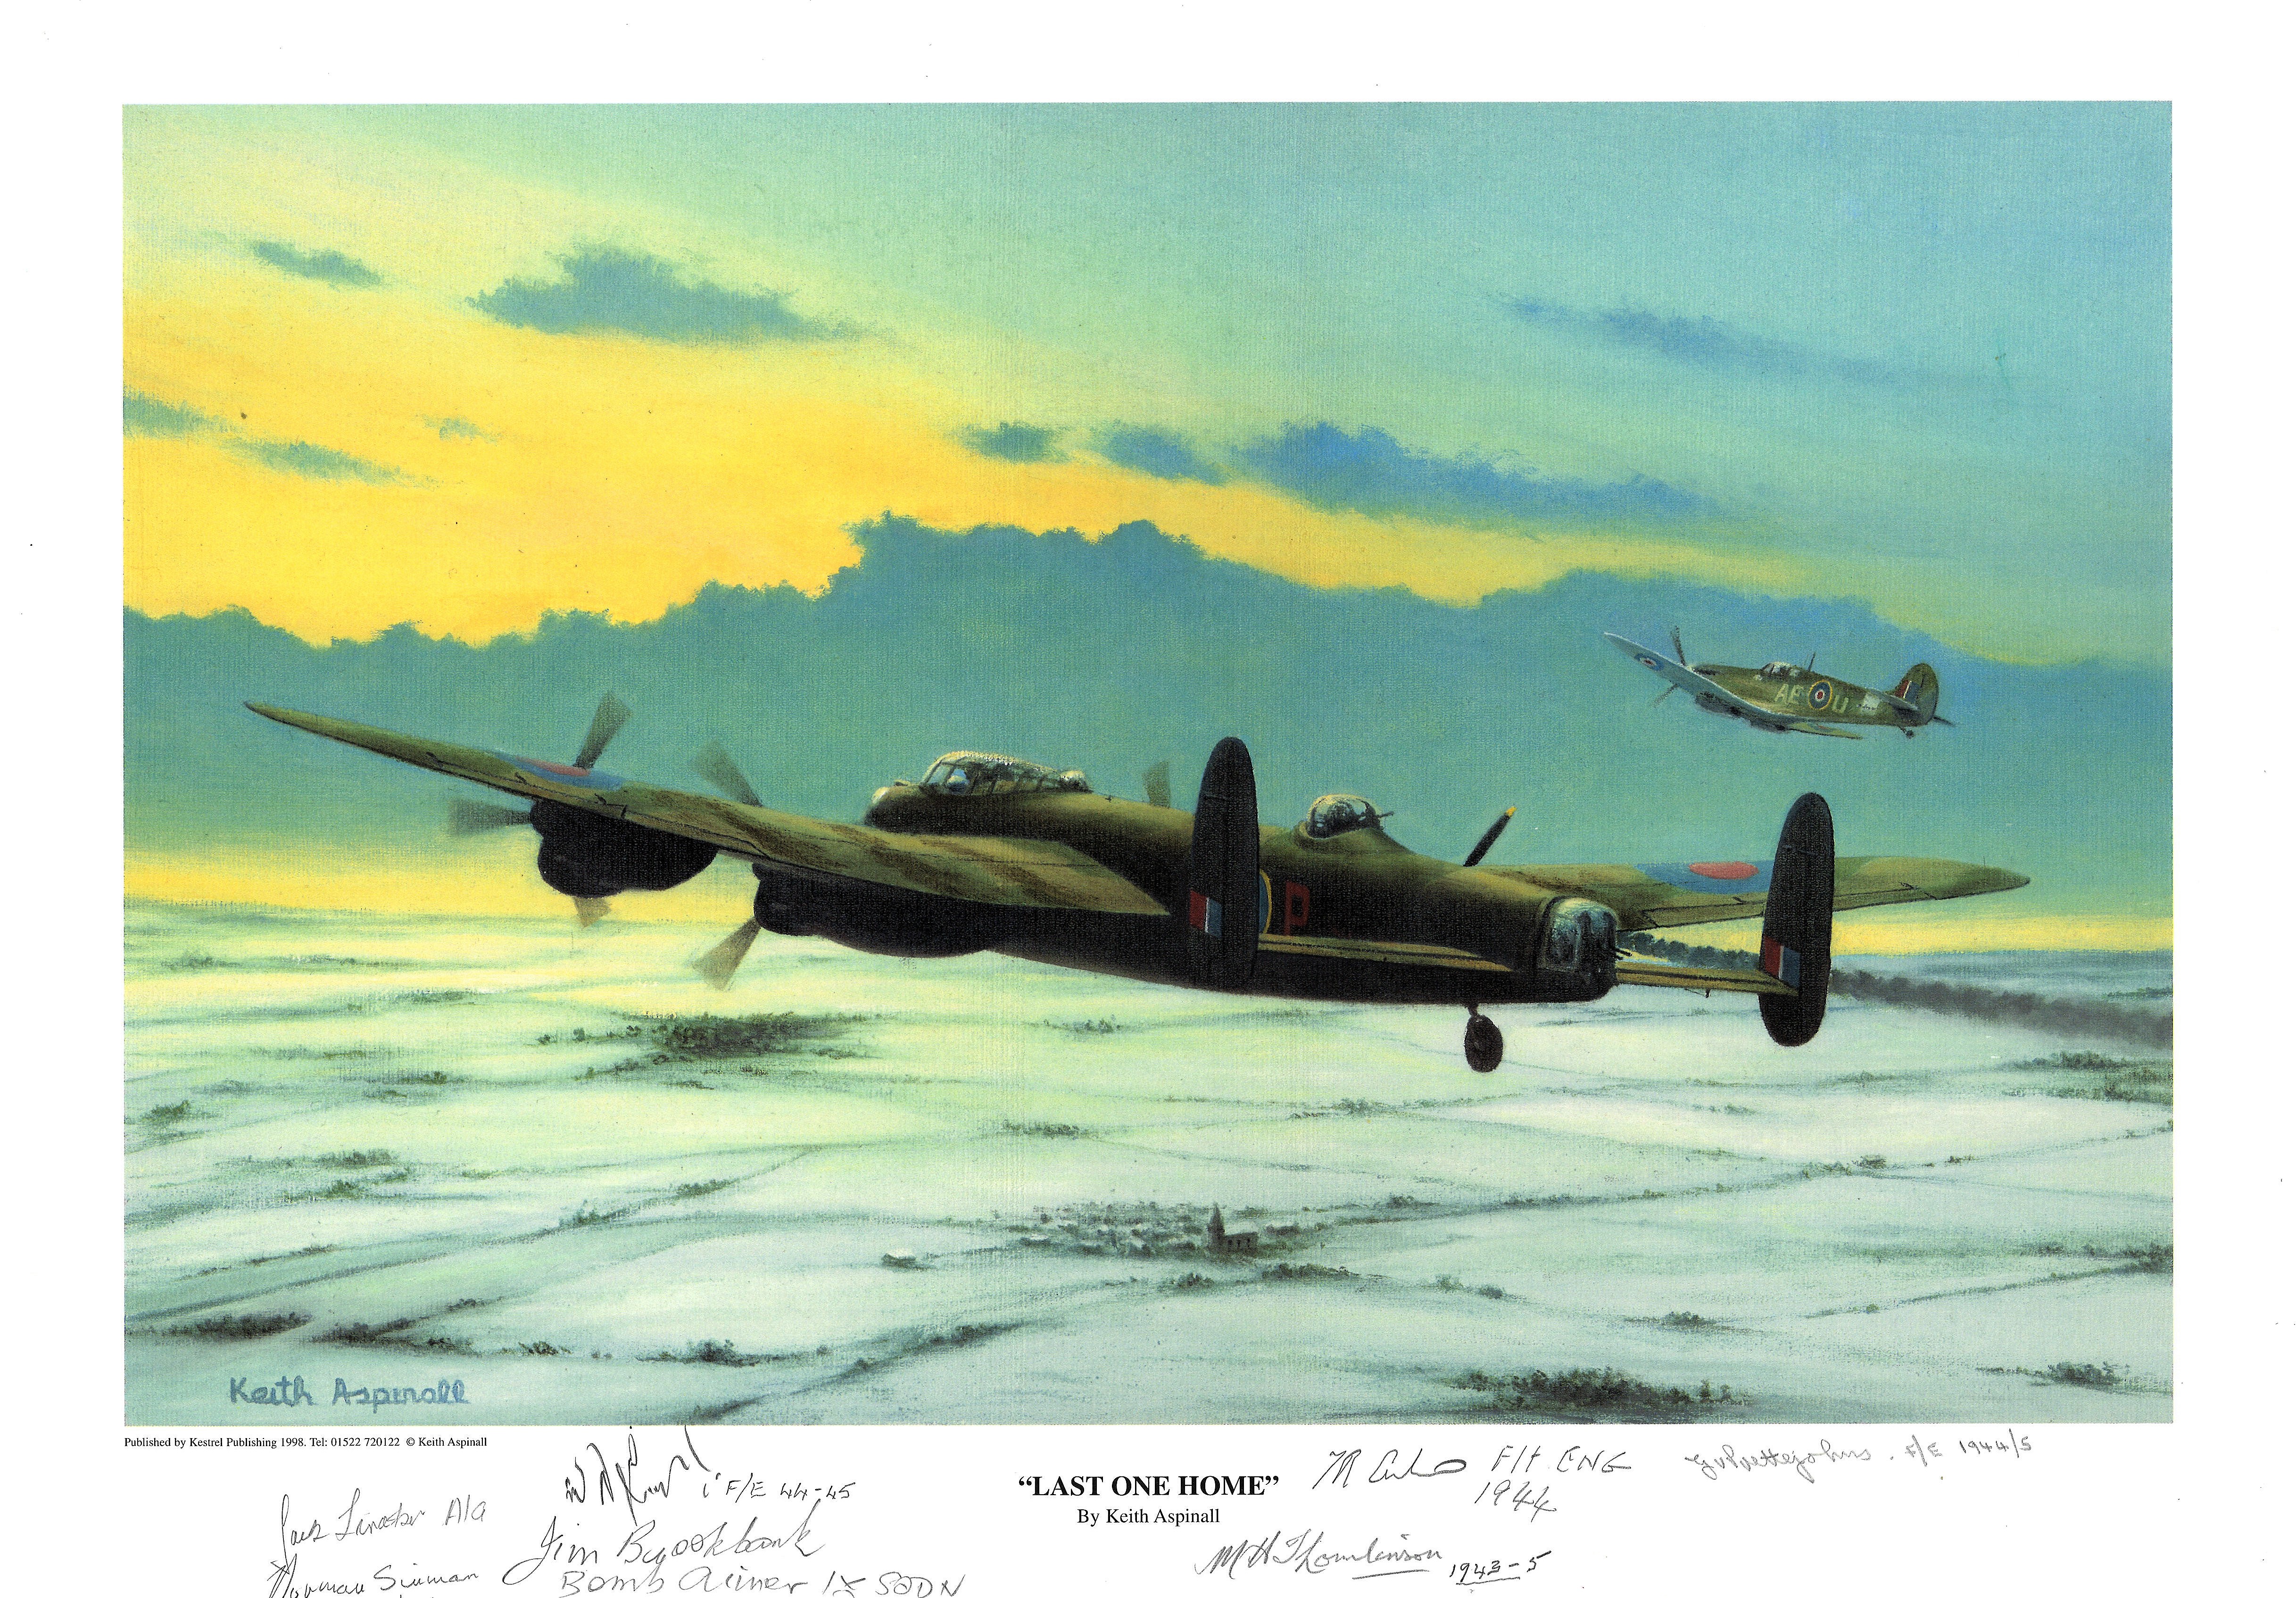 World War Two print approx 12 x16 titled "Last One Home "by the artist Keith Aspinall signed in